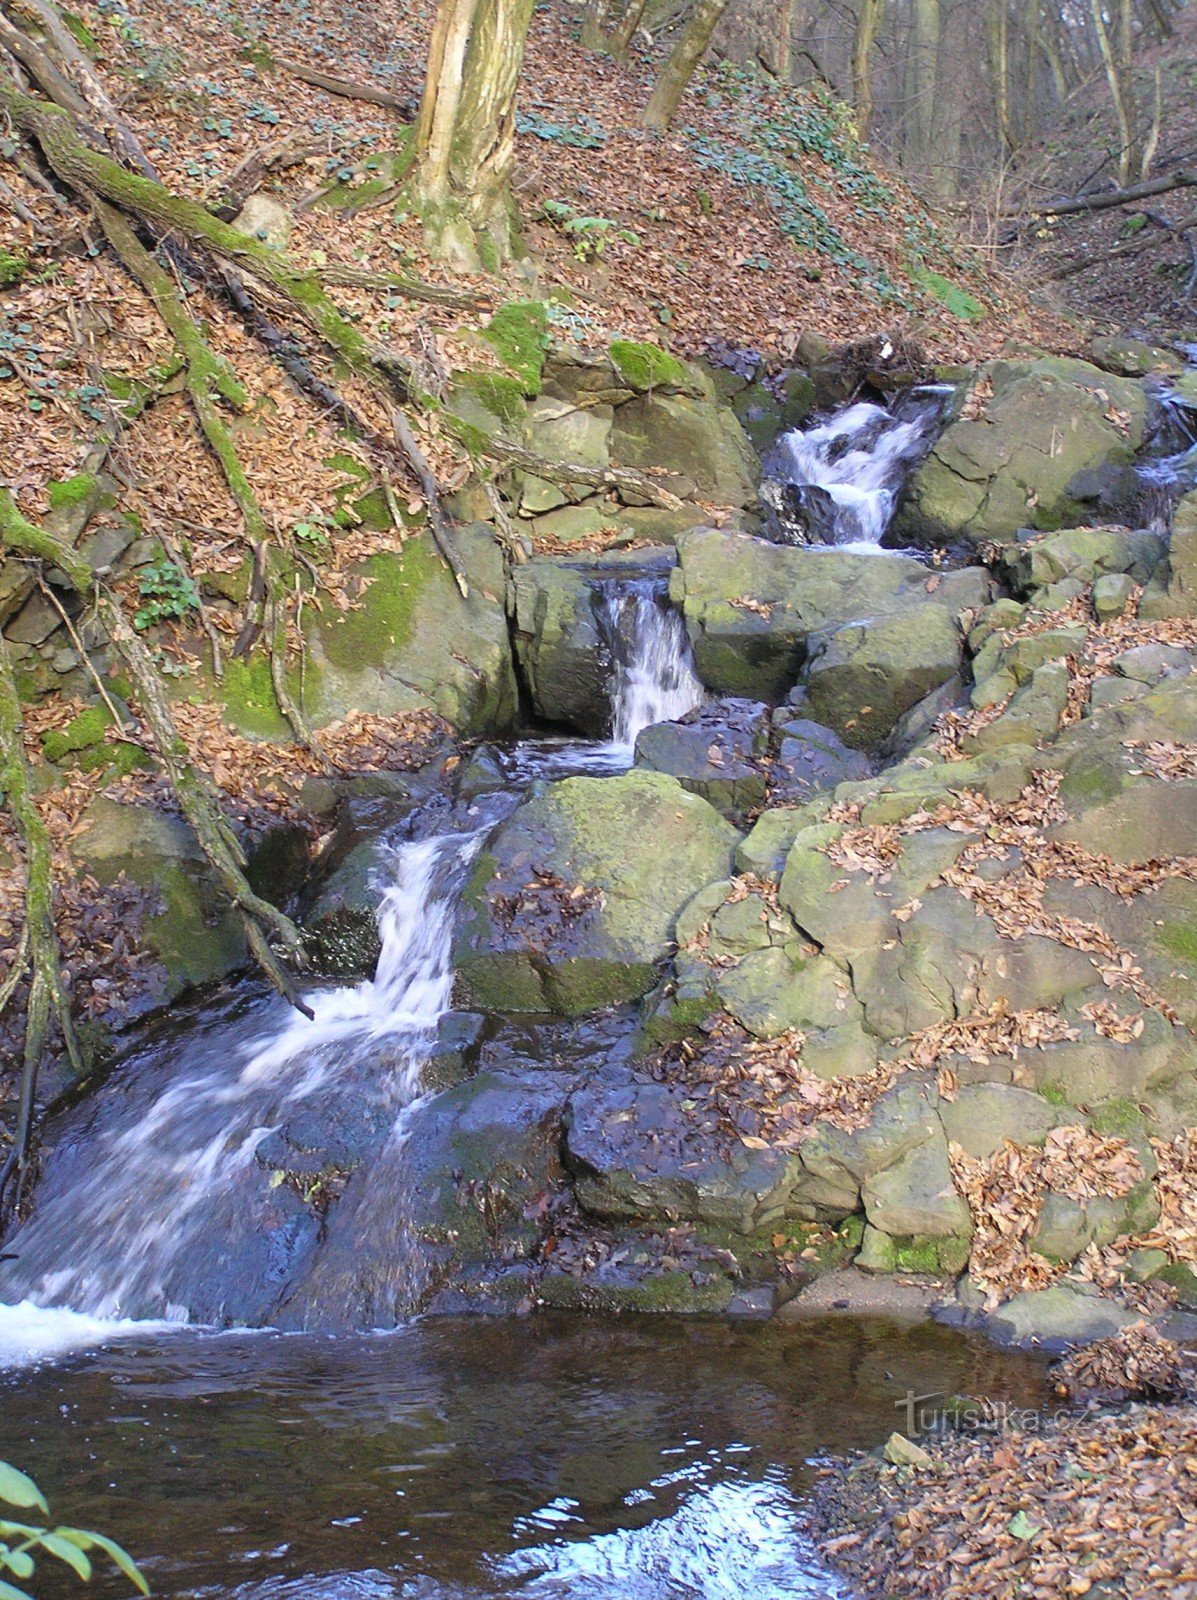 Waterfall in the Lhánická gorge